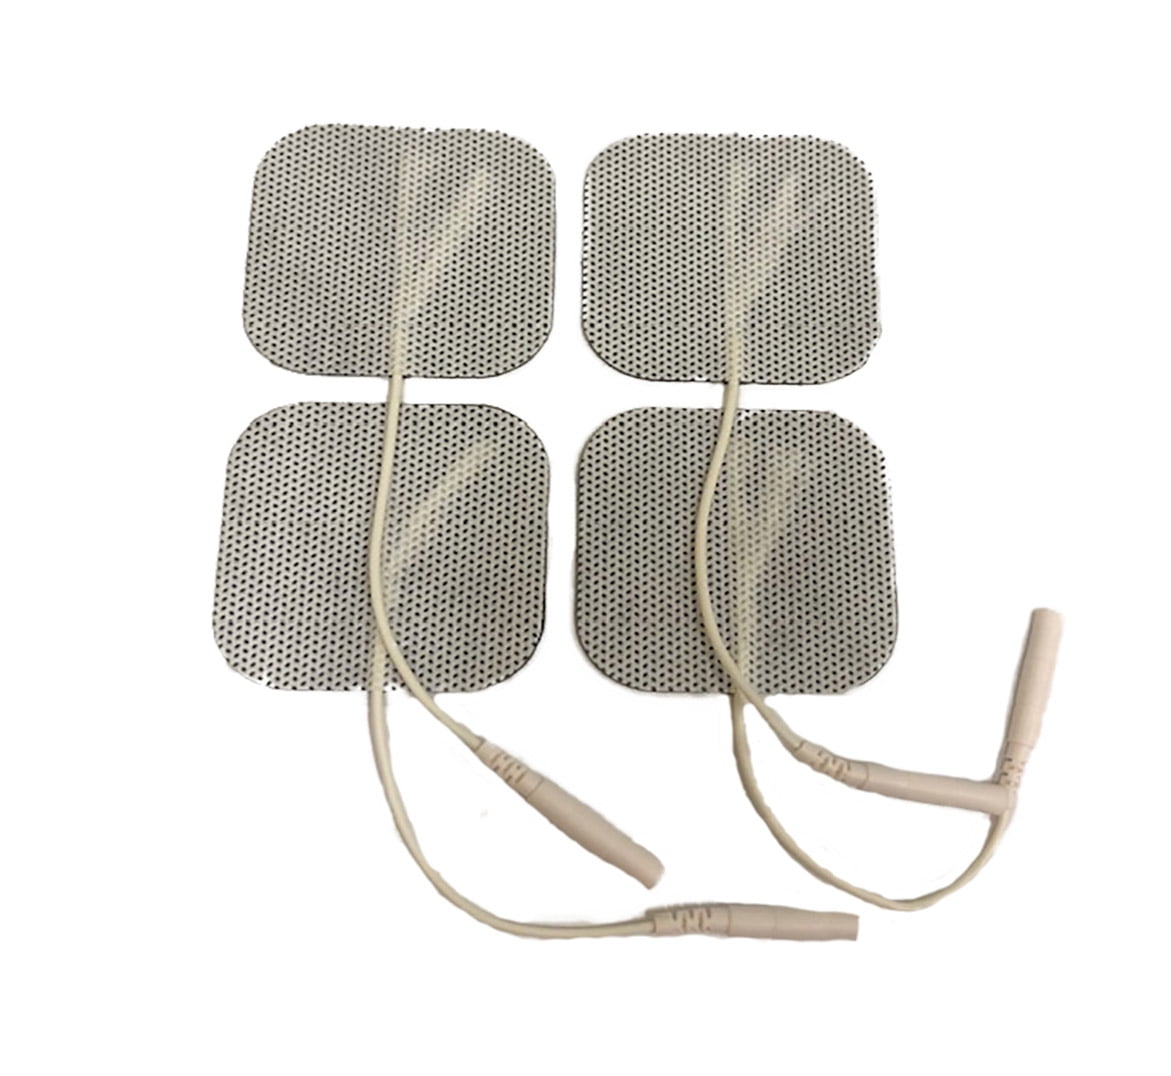 TENS Wired Electrodes Compatible with TENS 7000, TENS 3000 - 4